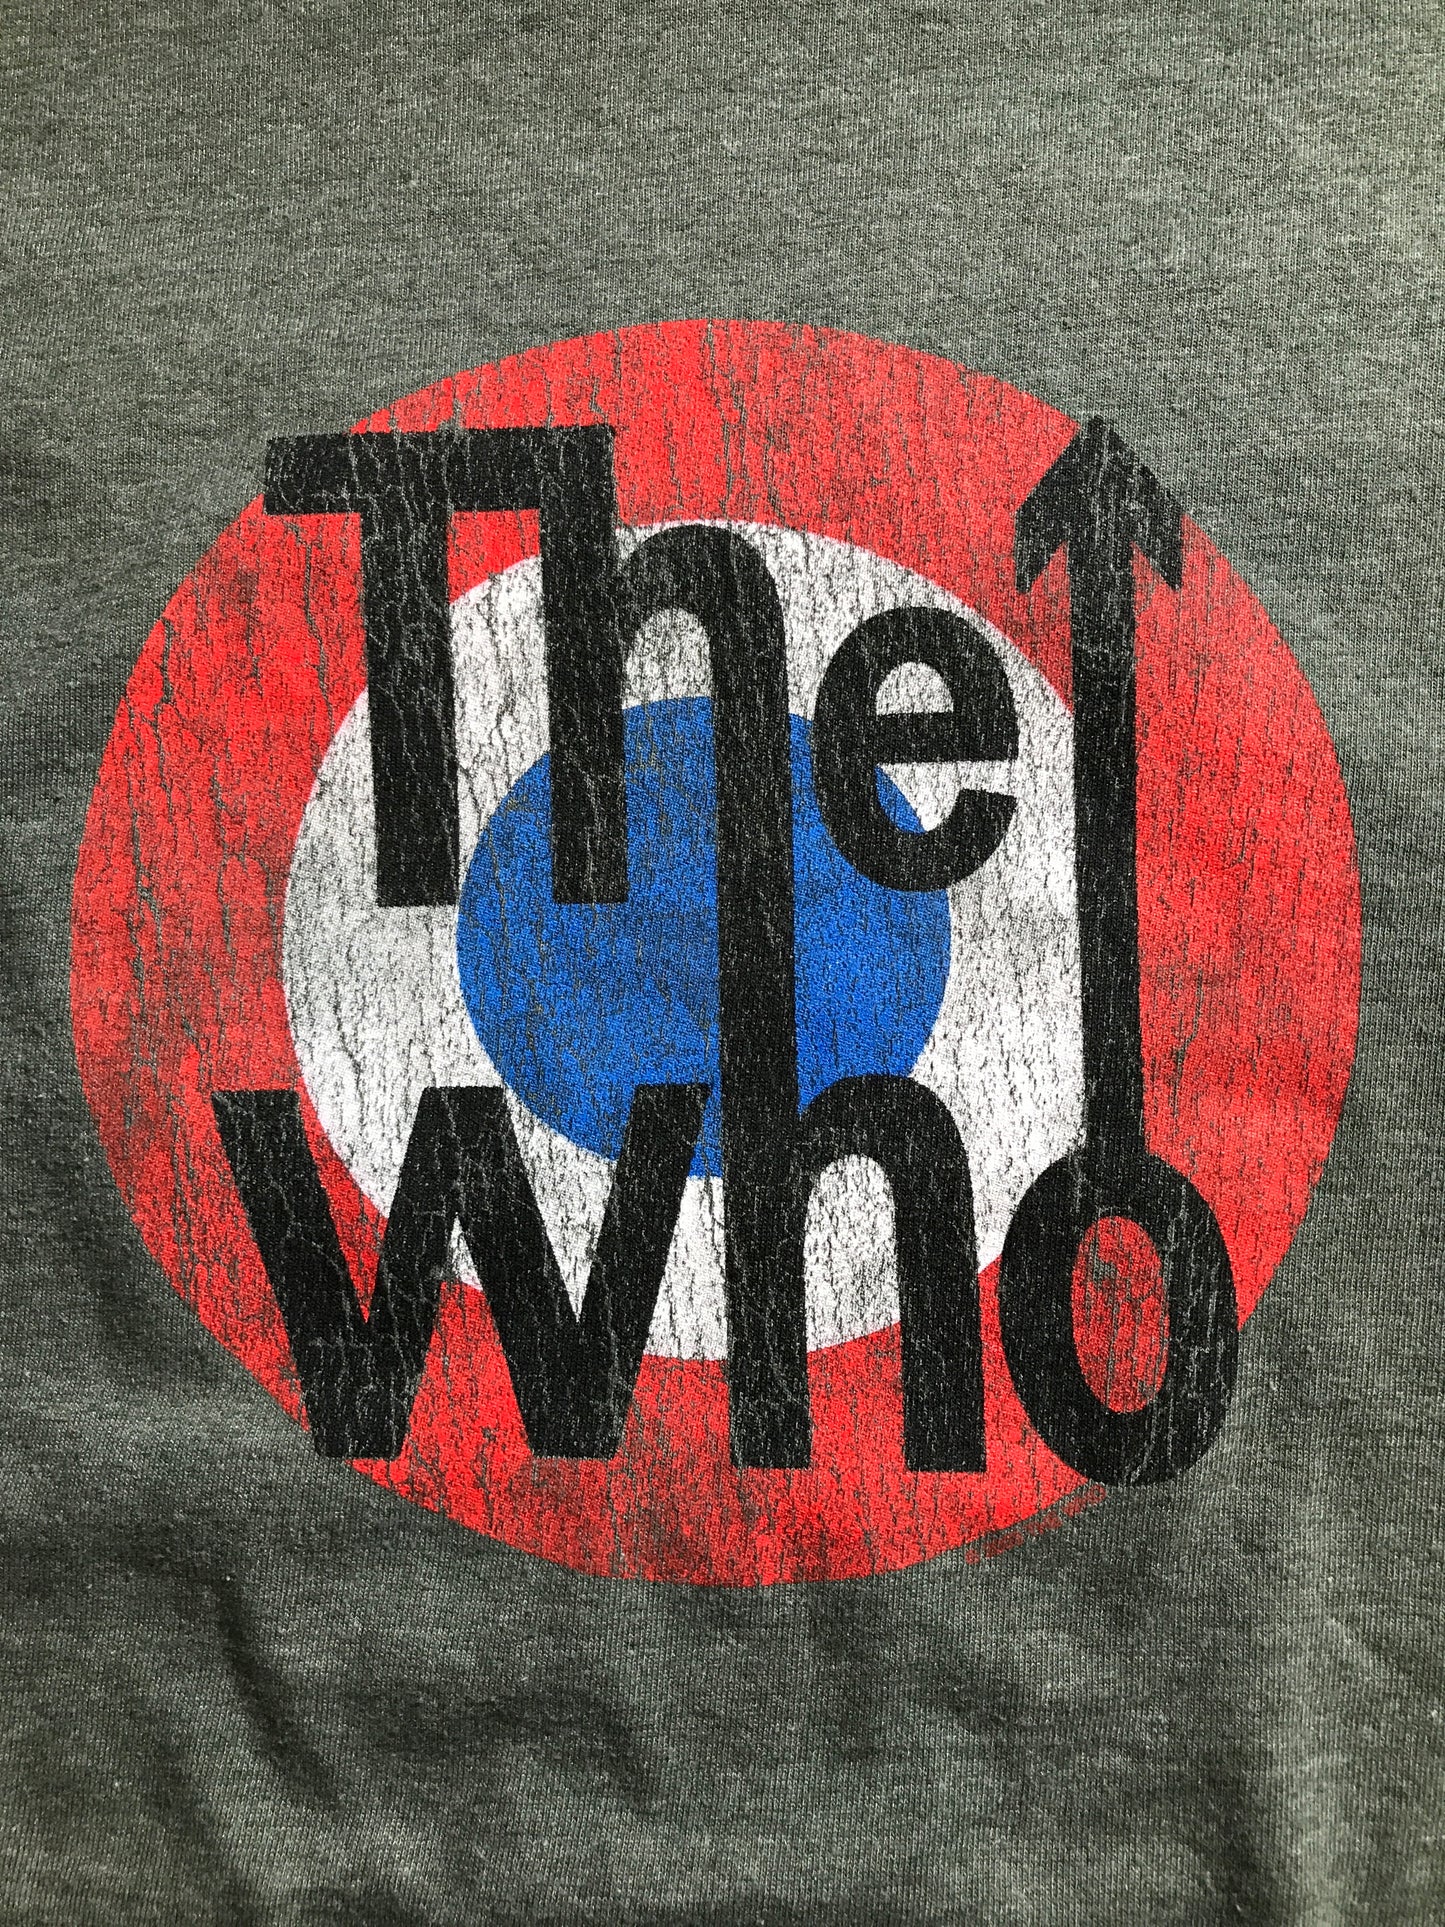 The Who 2003 T-shirt